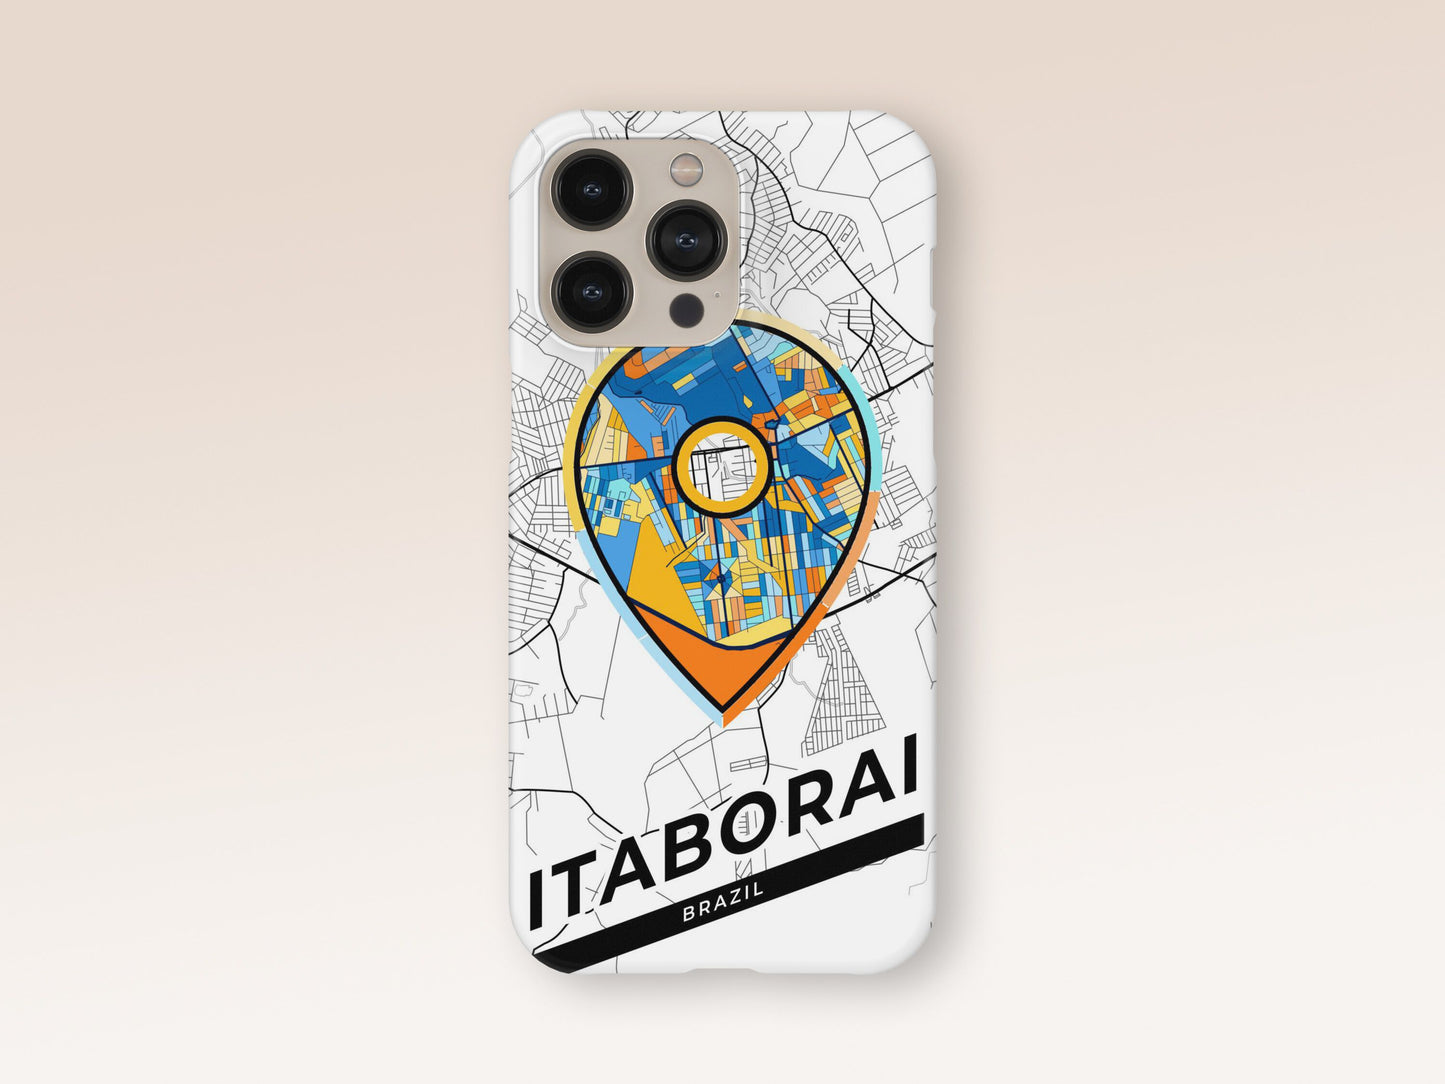 Itaborai Brazil slim phone case with colorful icon. Birthday, wedding or housewarming gift. Couple match cases. 1